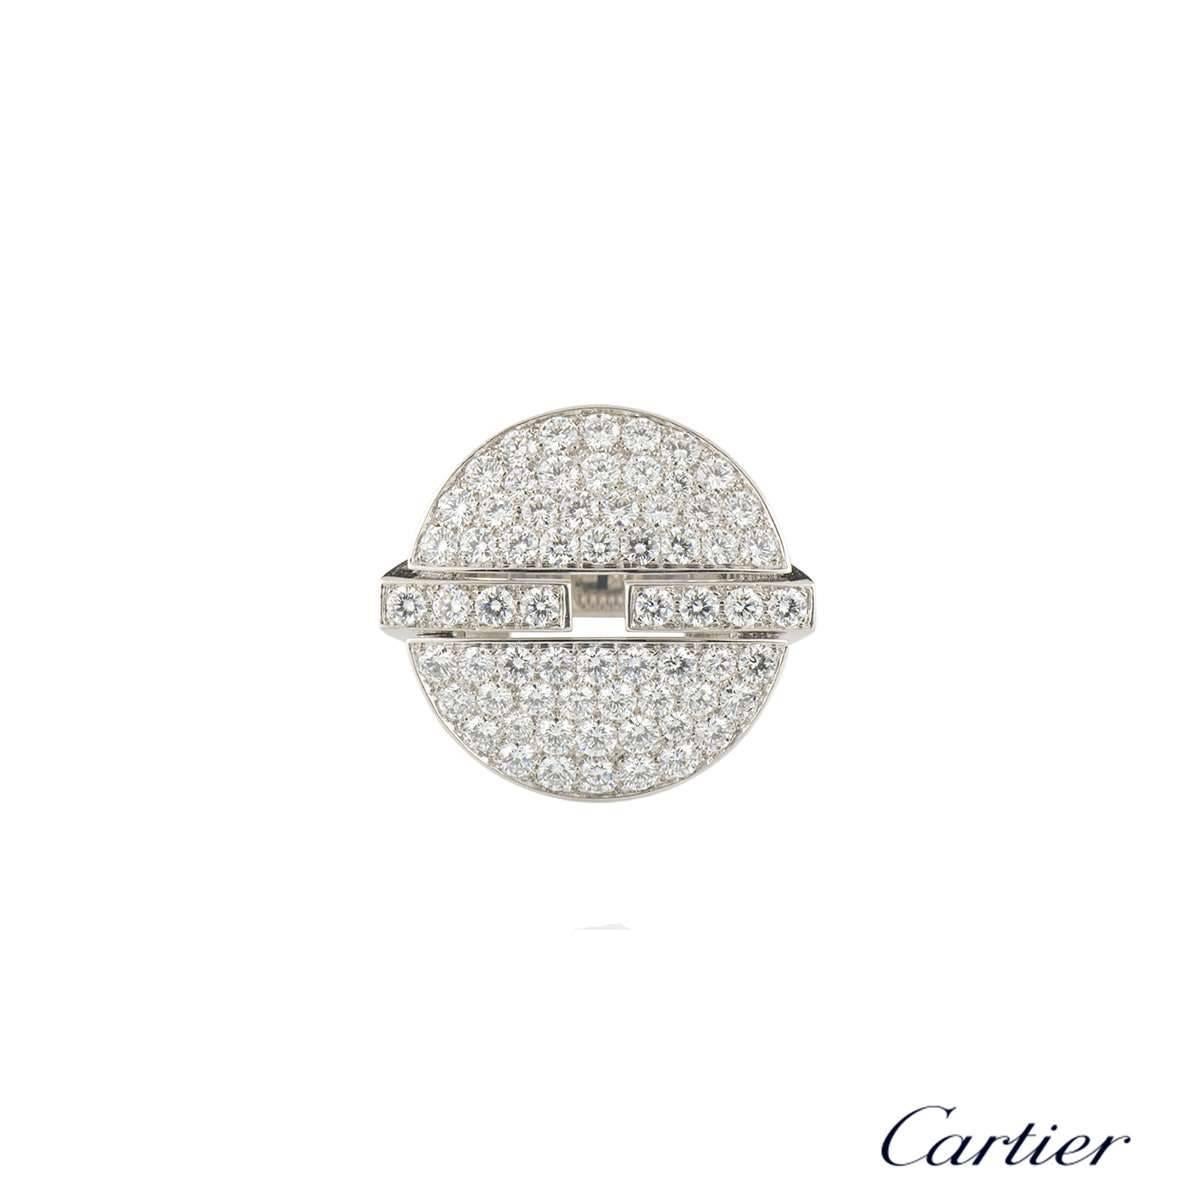 A stunning 18k white gold diamond set Himalia ring by Cartier. The circular ring is fully pave set with 72 round brilliant cut diamonds totalling approximately 2.16, predominantly F colour and VS clarity. The motif is divided into two halves,